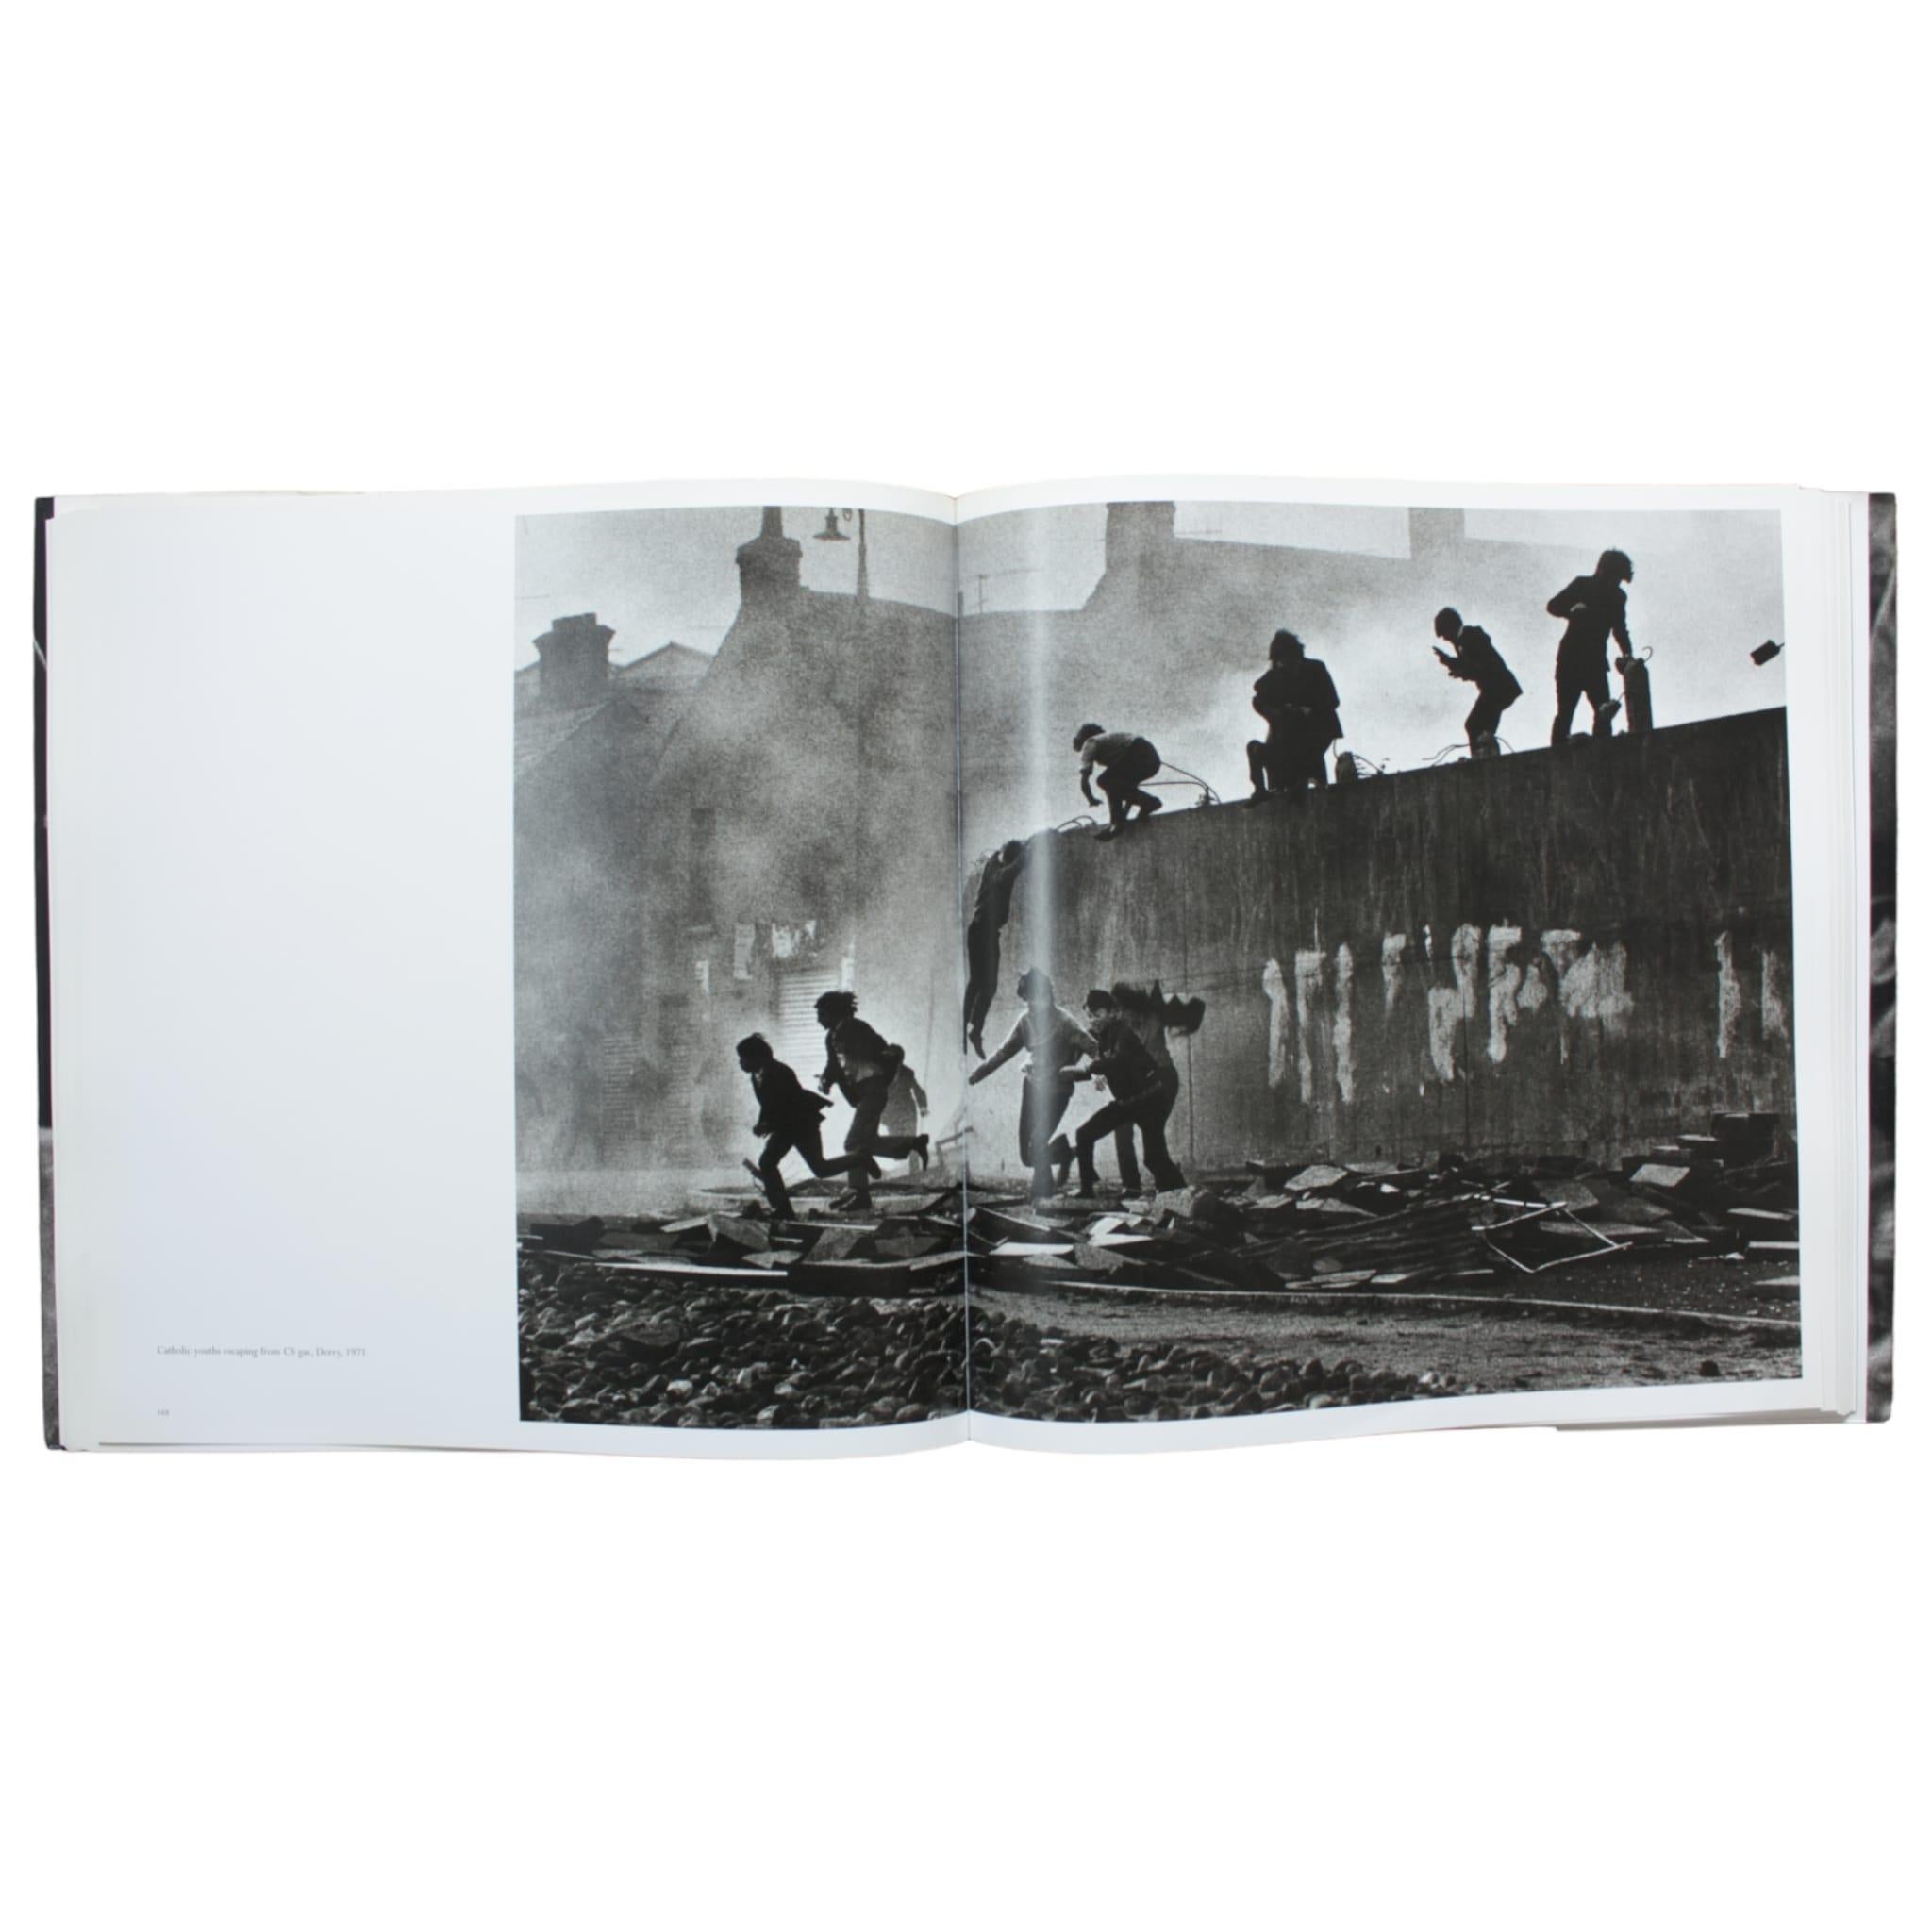 Mid-Century Modern Don McCullin, First Edition, Hardcover, 2001 , Art Photography Book For Sale